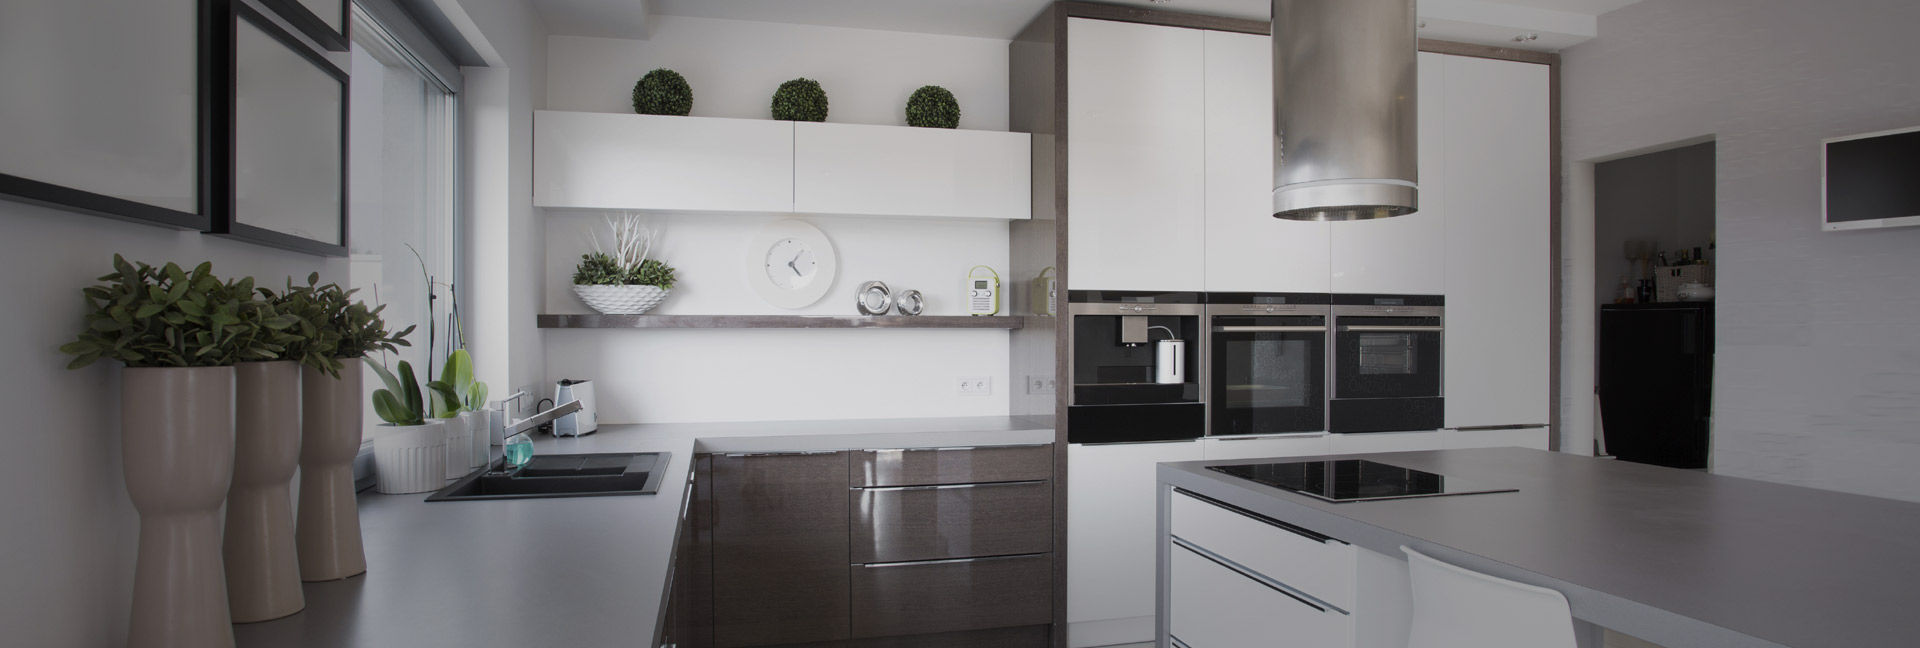 Kitchen Designs and Fitters in Bearsden and Milgavie